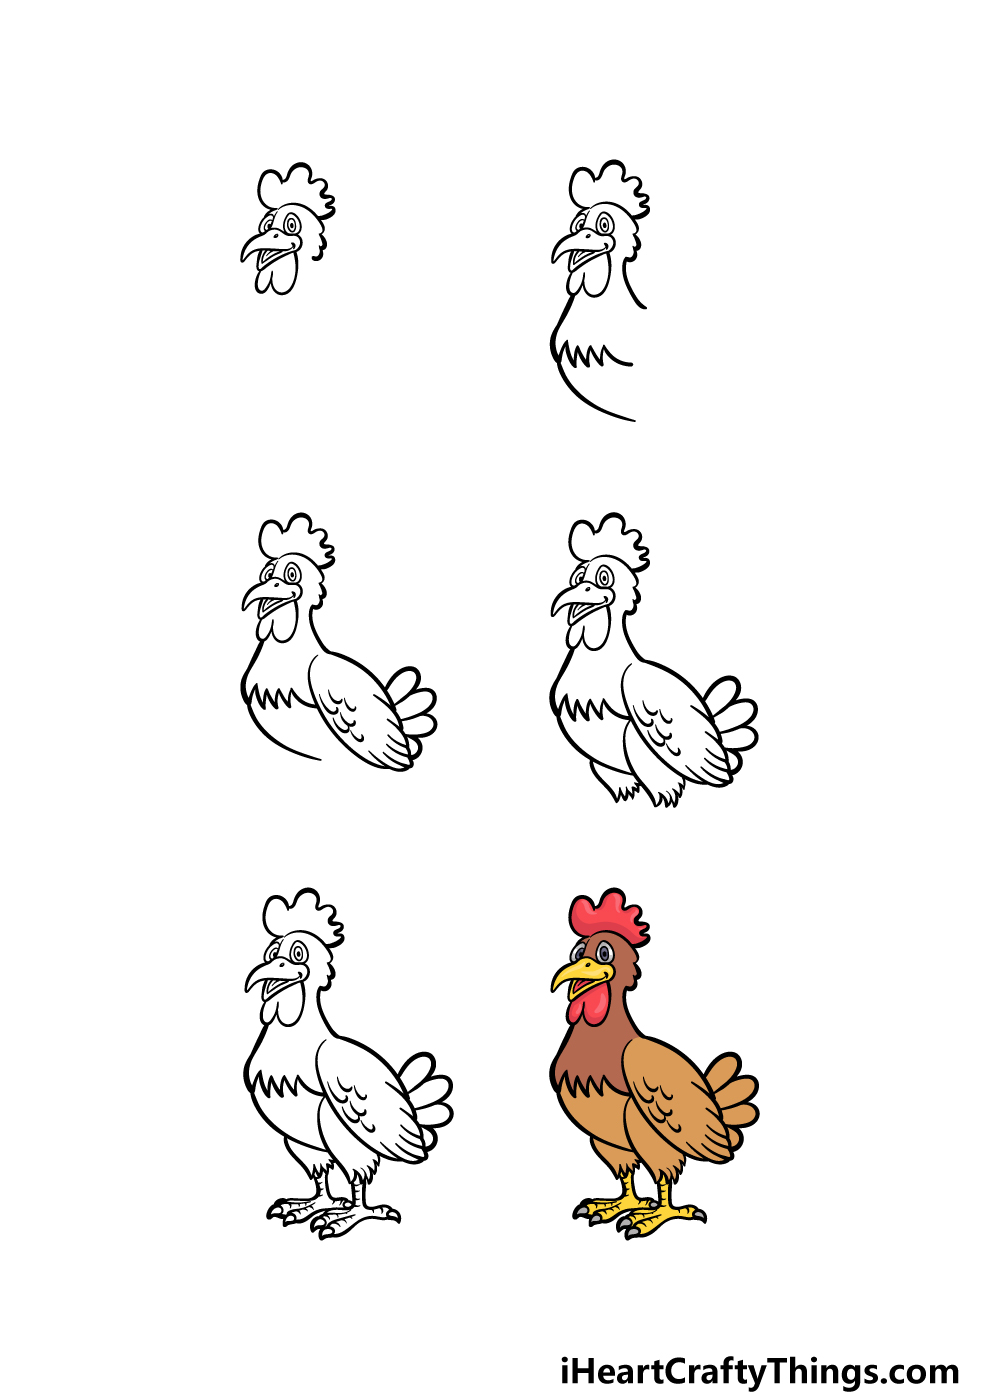 how to draw a cartoon chicken in 6 steps